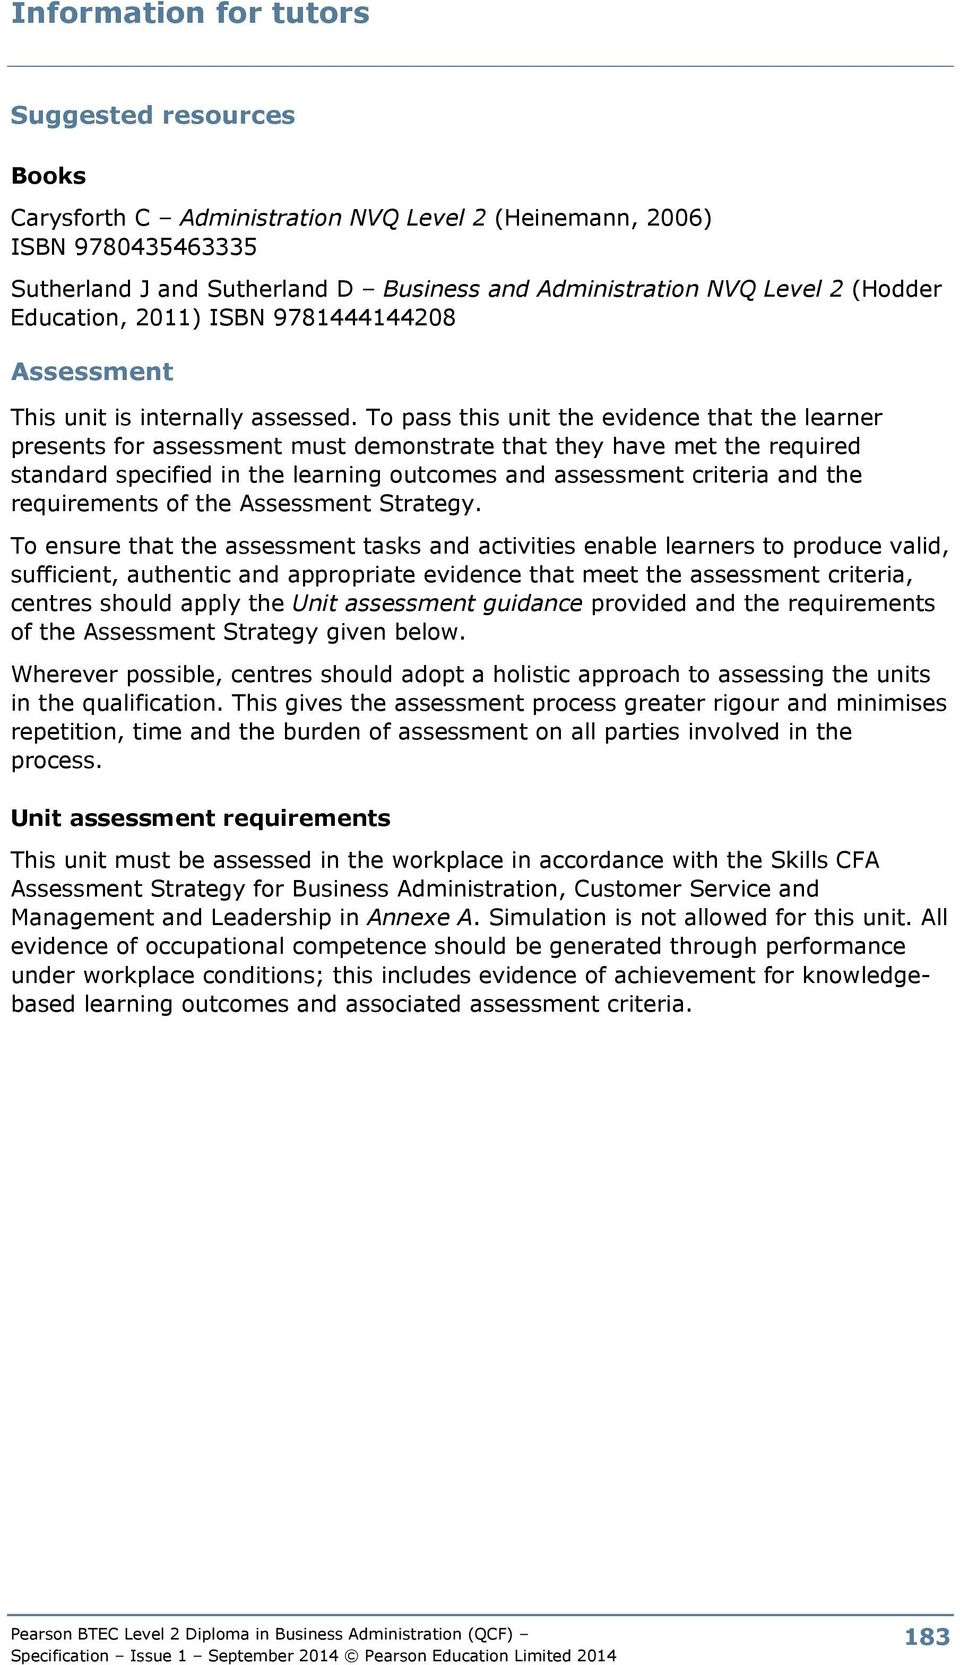 To pass this unit the evidence that the learner presents for assessment must demonstrate that they have met the required standard specified in the learning outcomes and assessment criteria and the